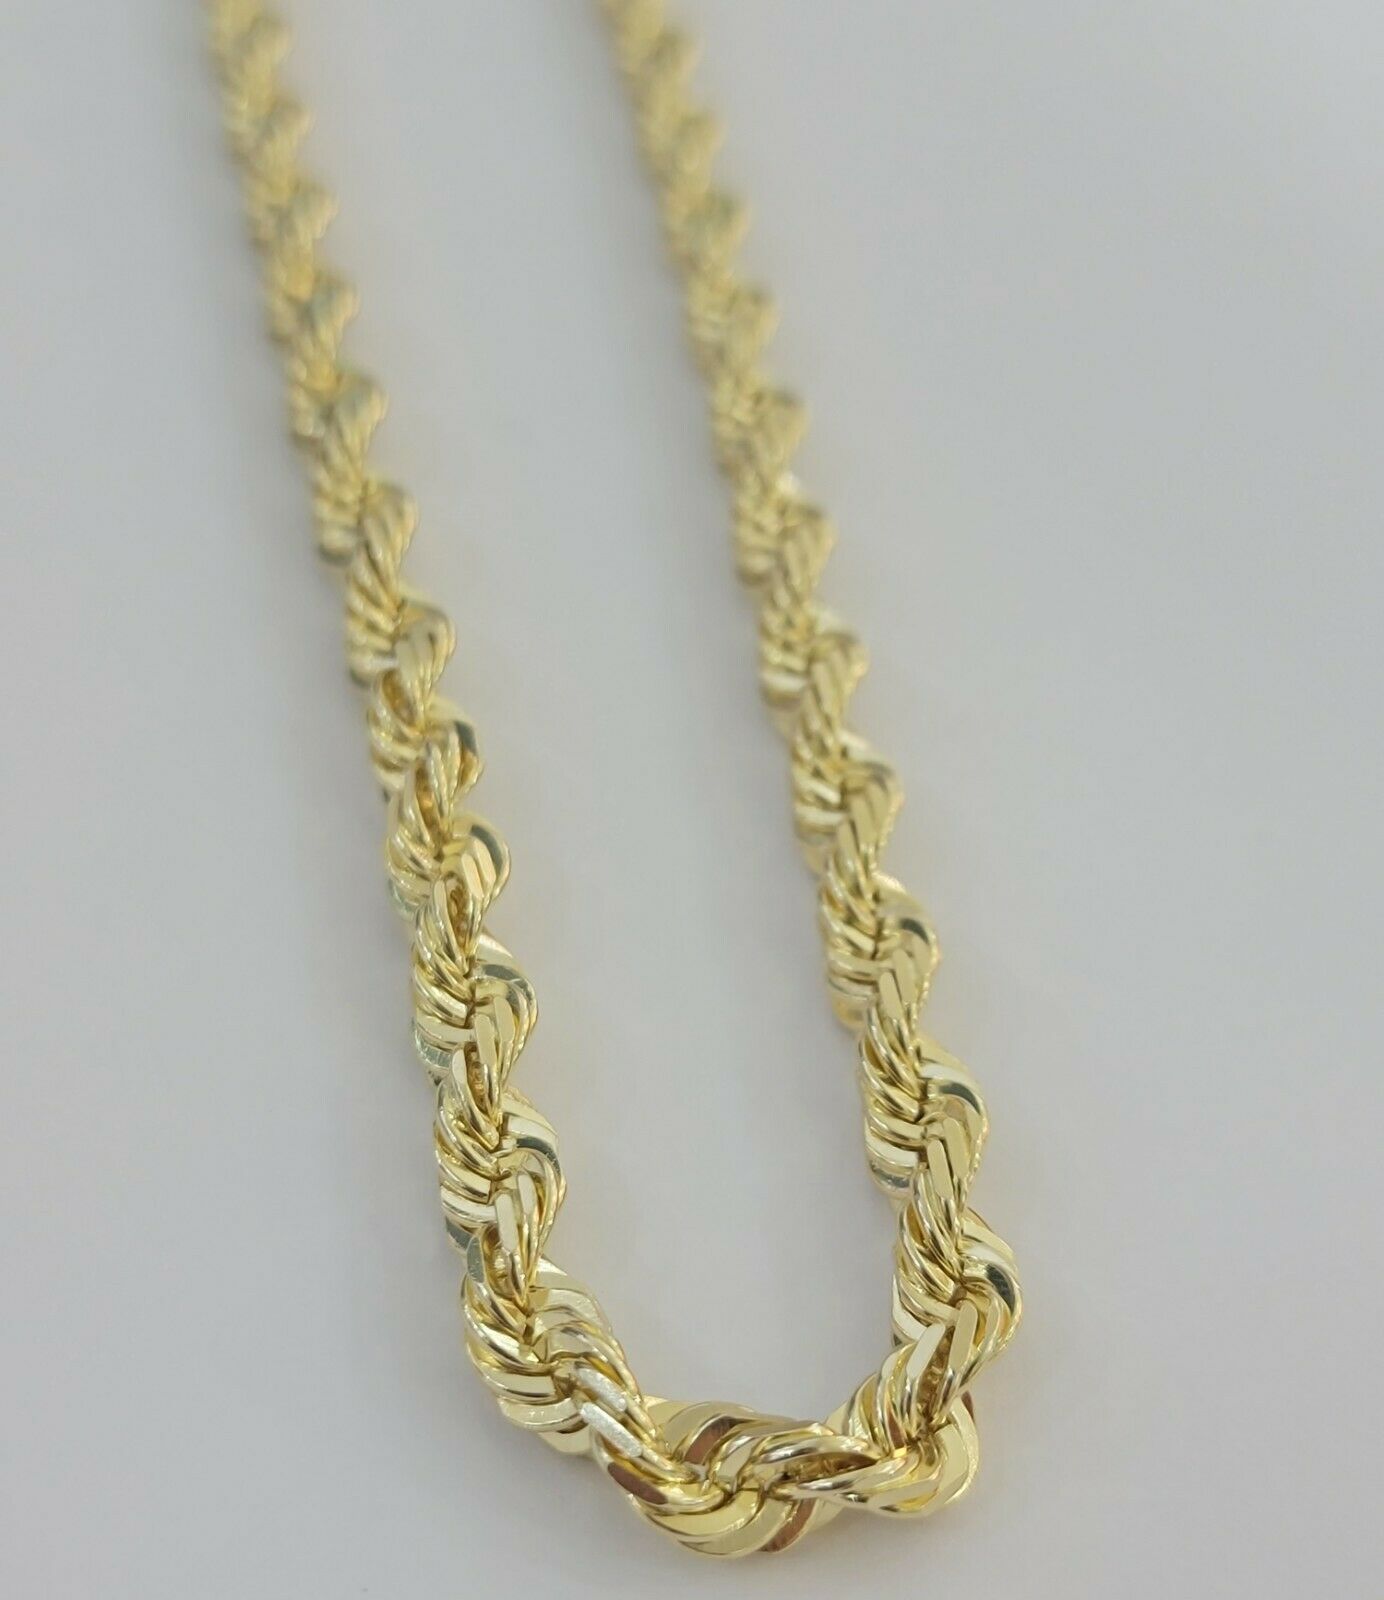 REAL 10k Gold Chain Rope Necklace SOLID 7mm Mens 10kt Yellow 22- 30" Inch STRONG